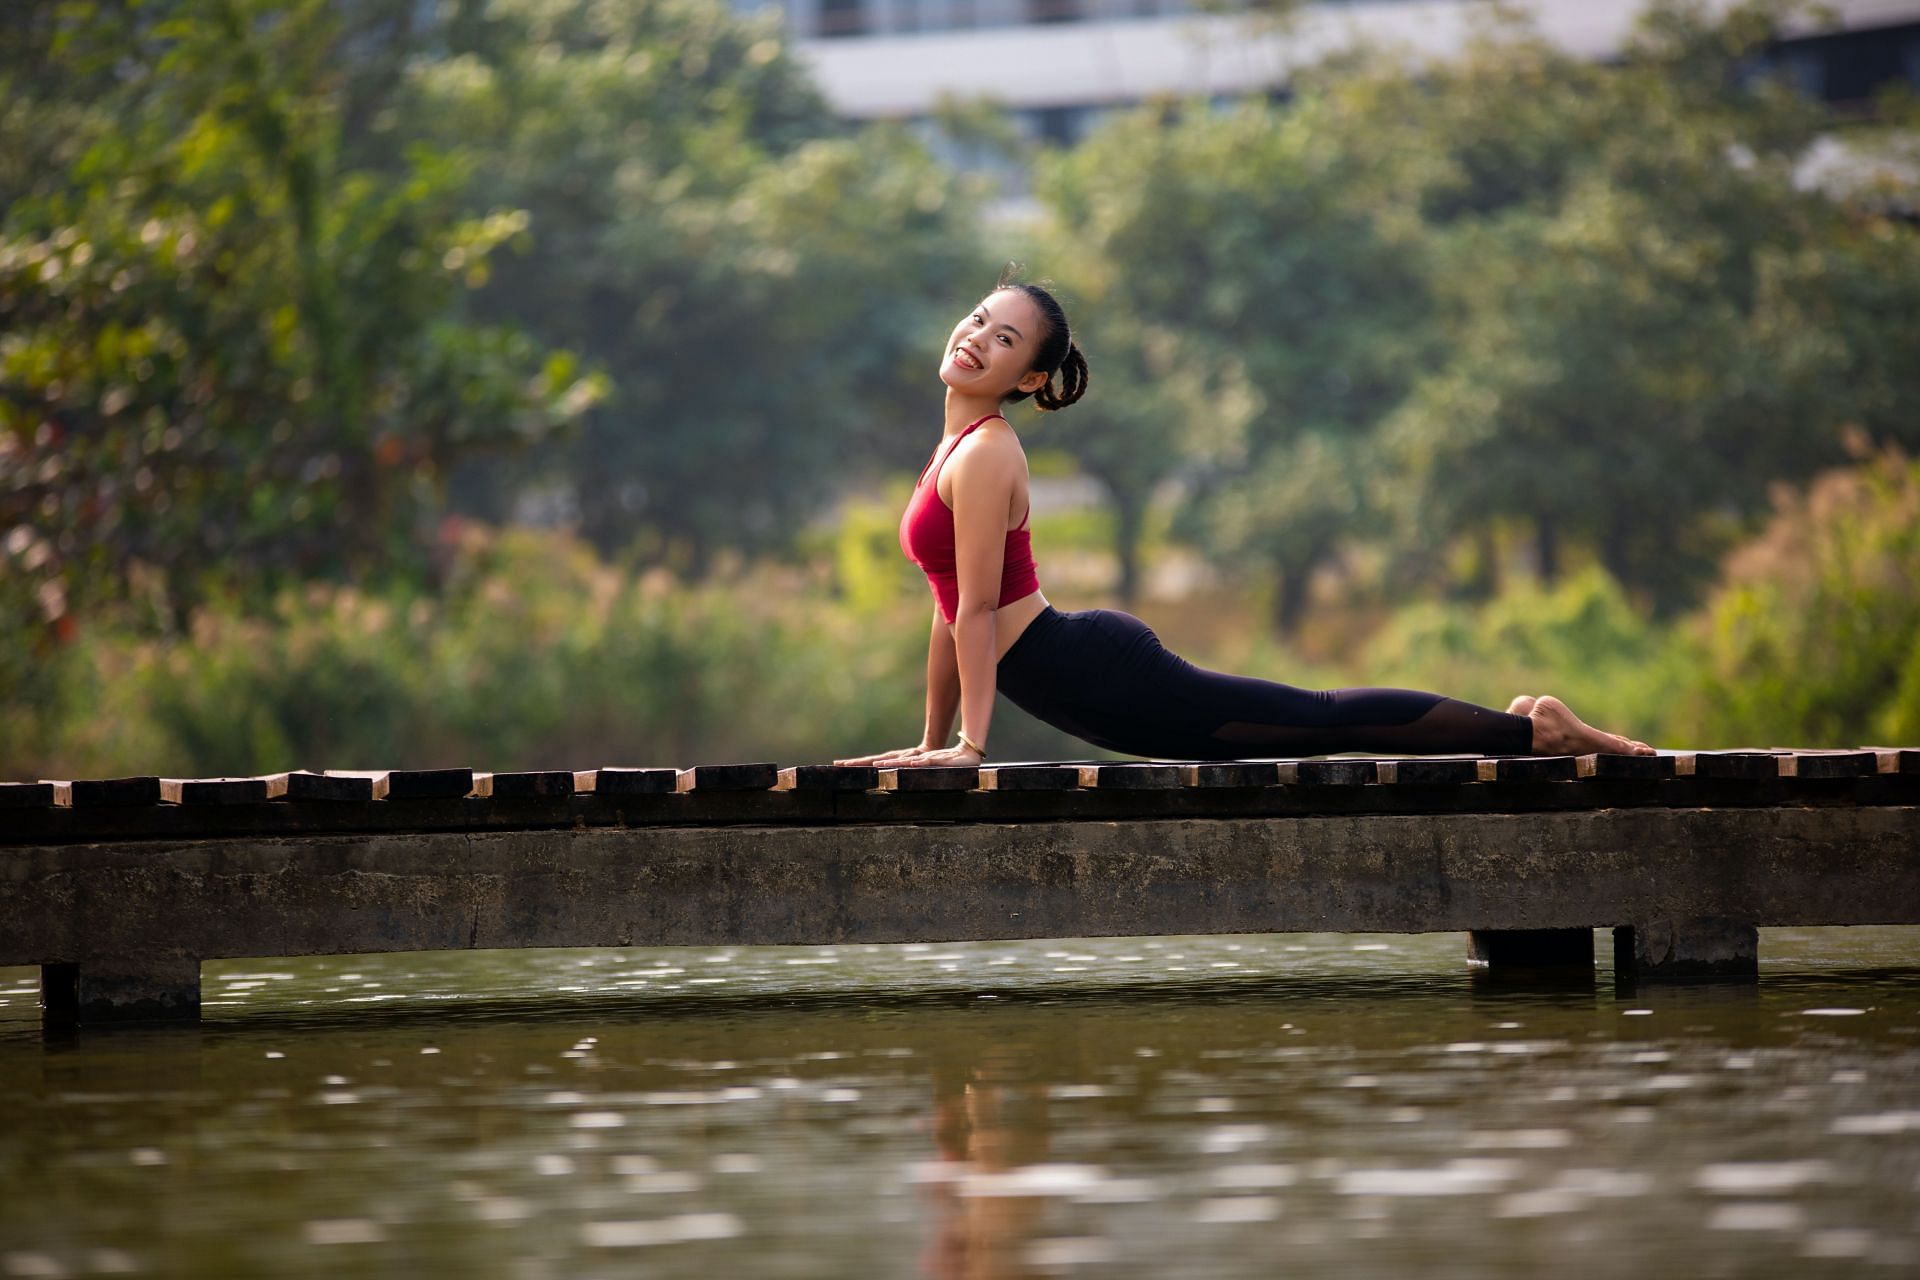 Backbends are known for strengthening the back. (Image via Pexels/Shu Lei)